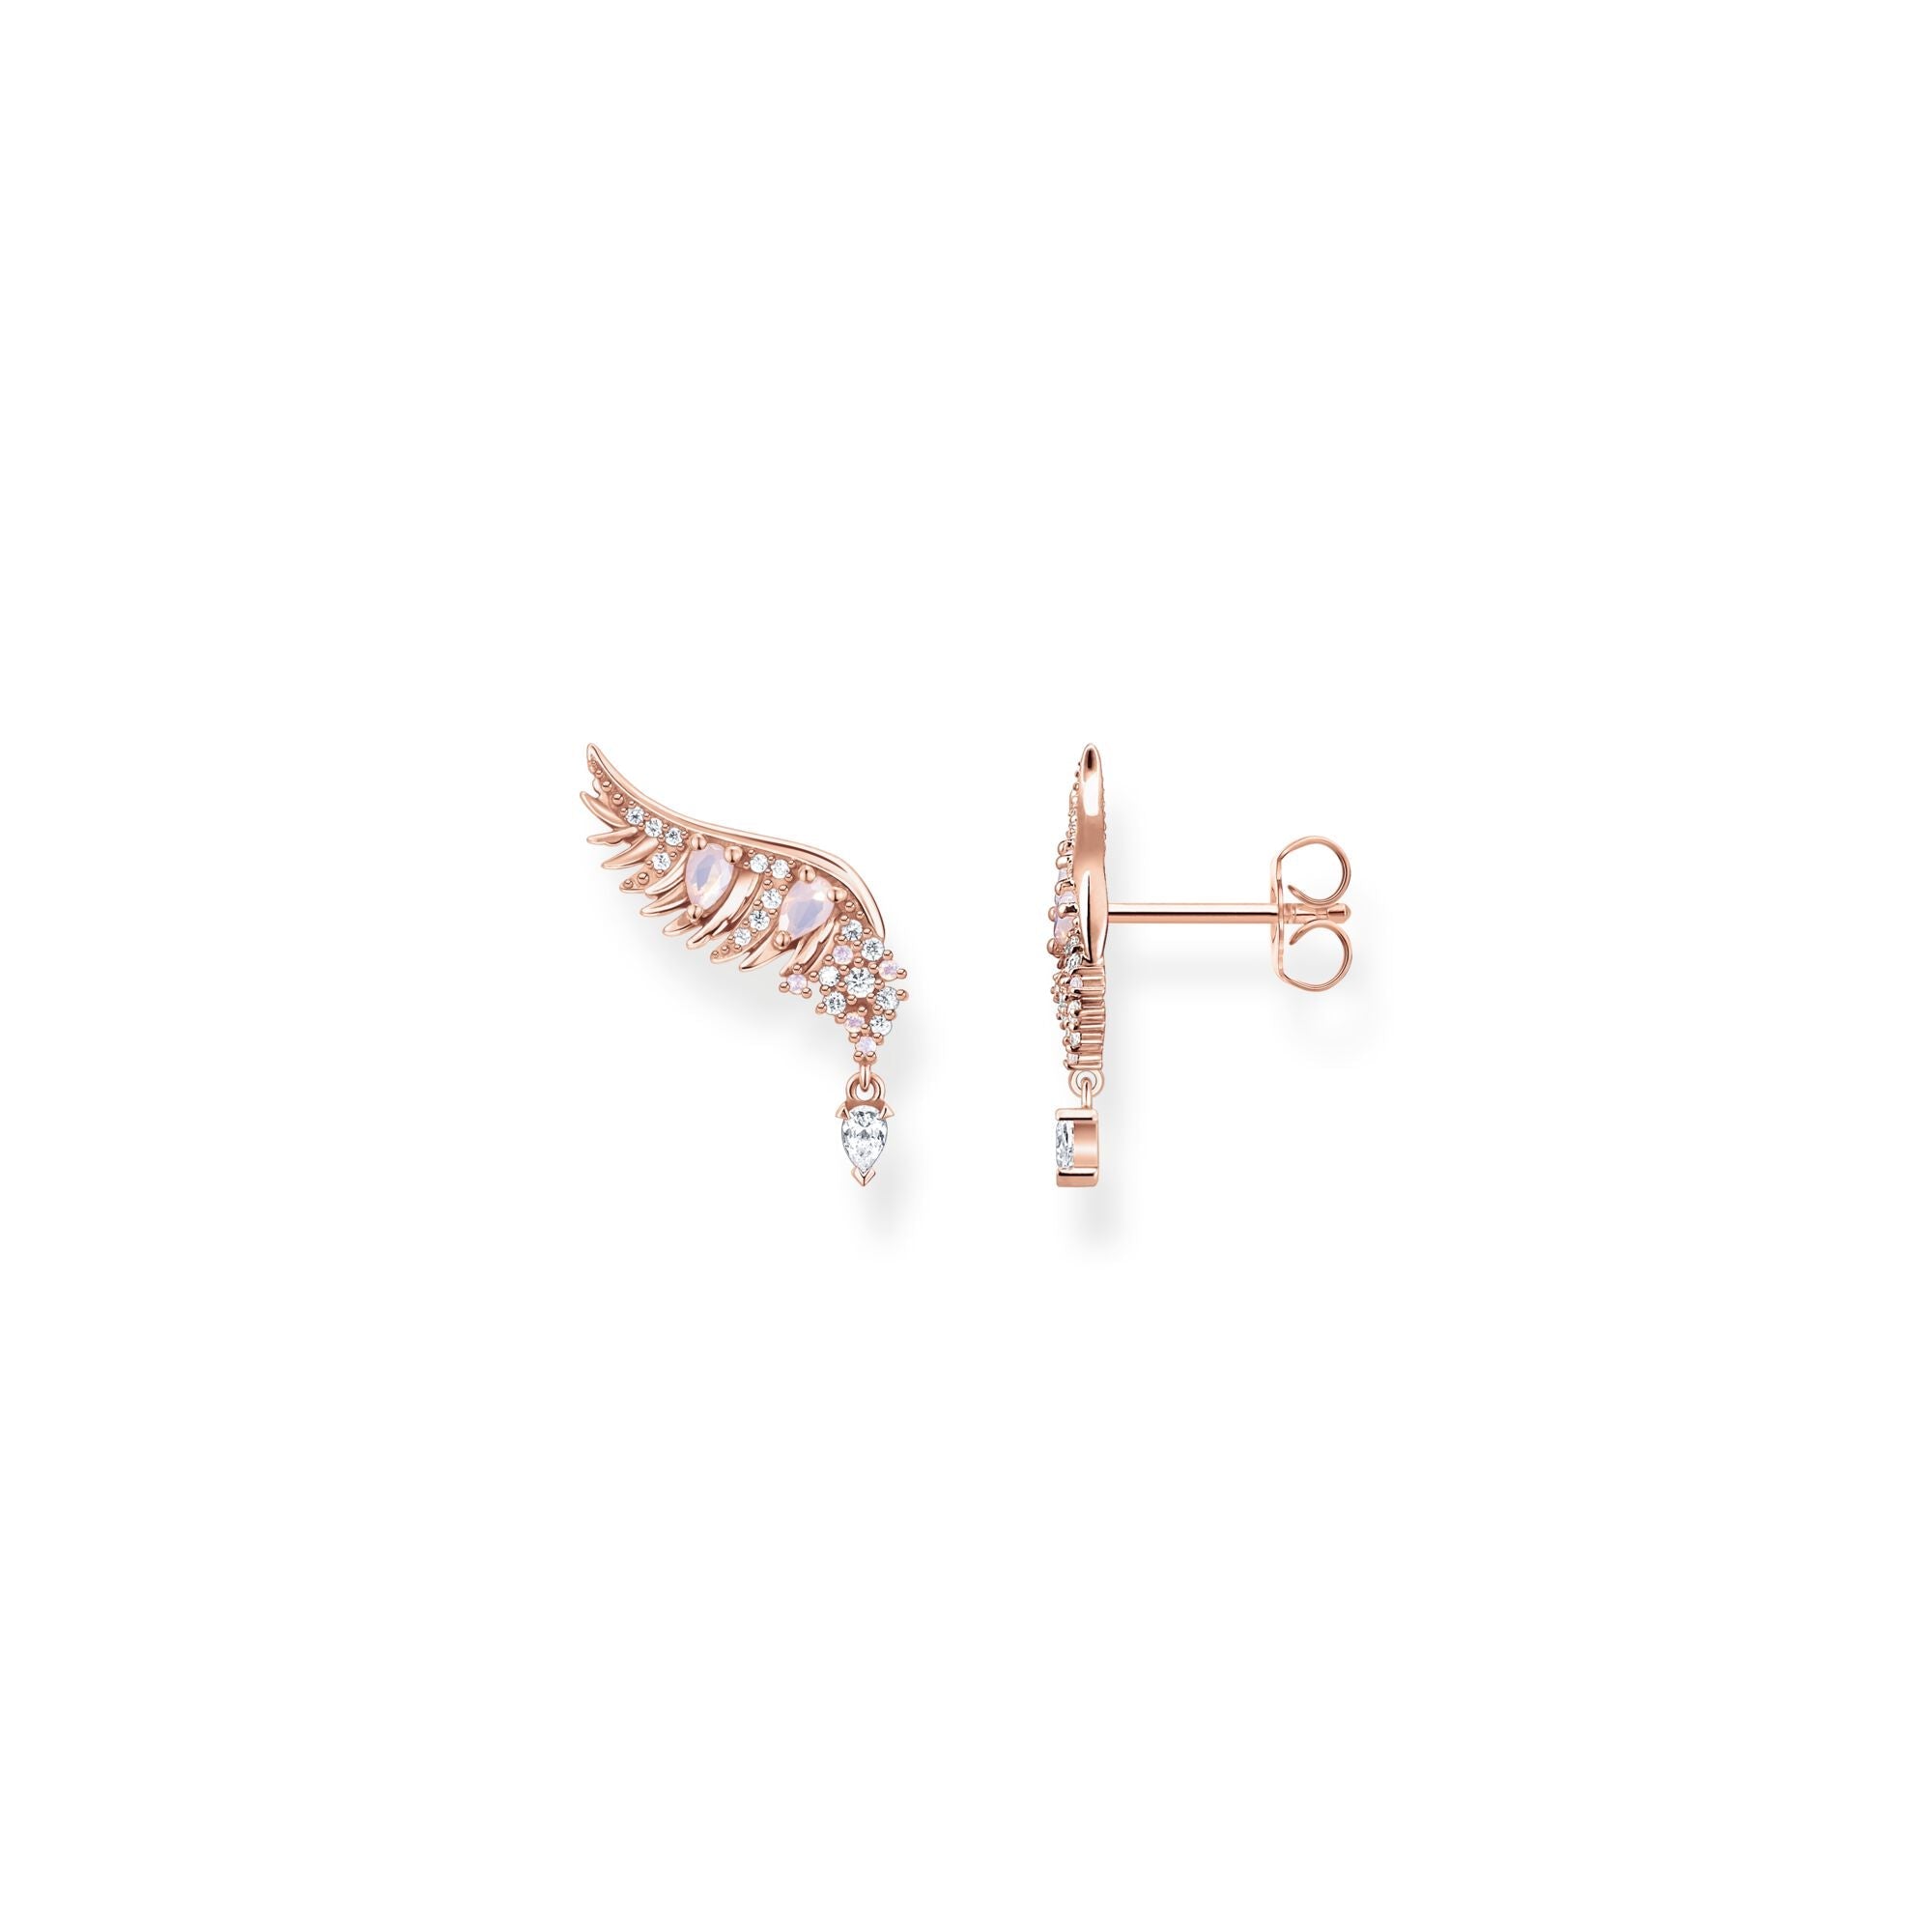 Thomas Sabo Rose Gold Plated Sterling Silver Phoenix Wing Pink Stones Earrings